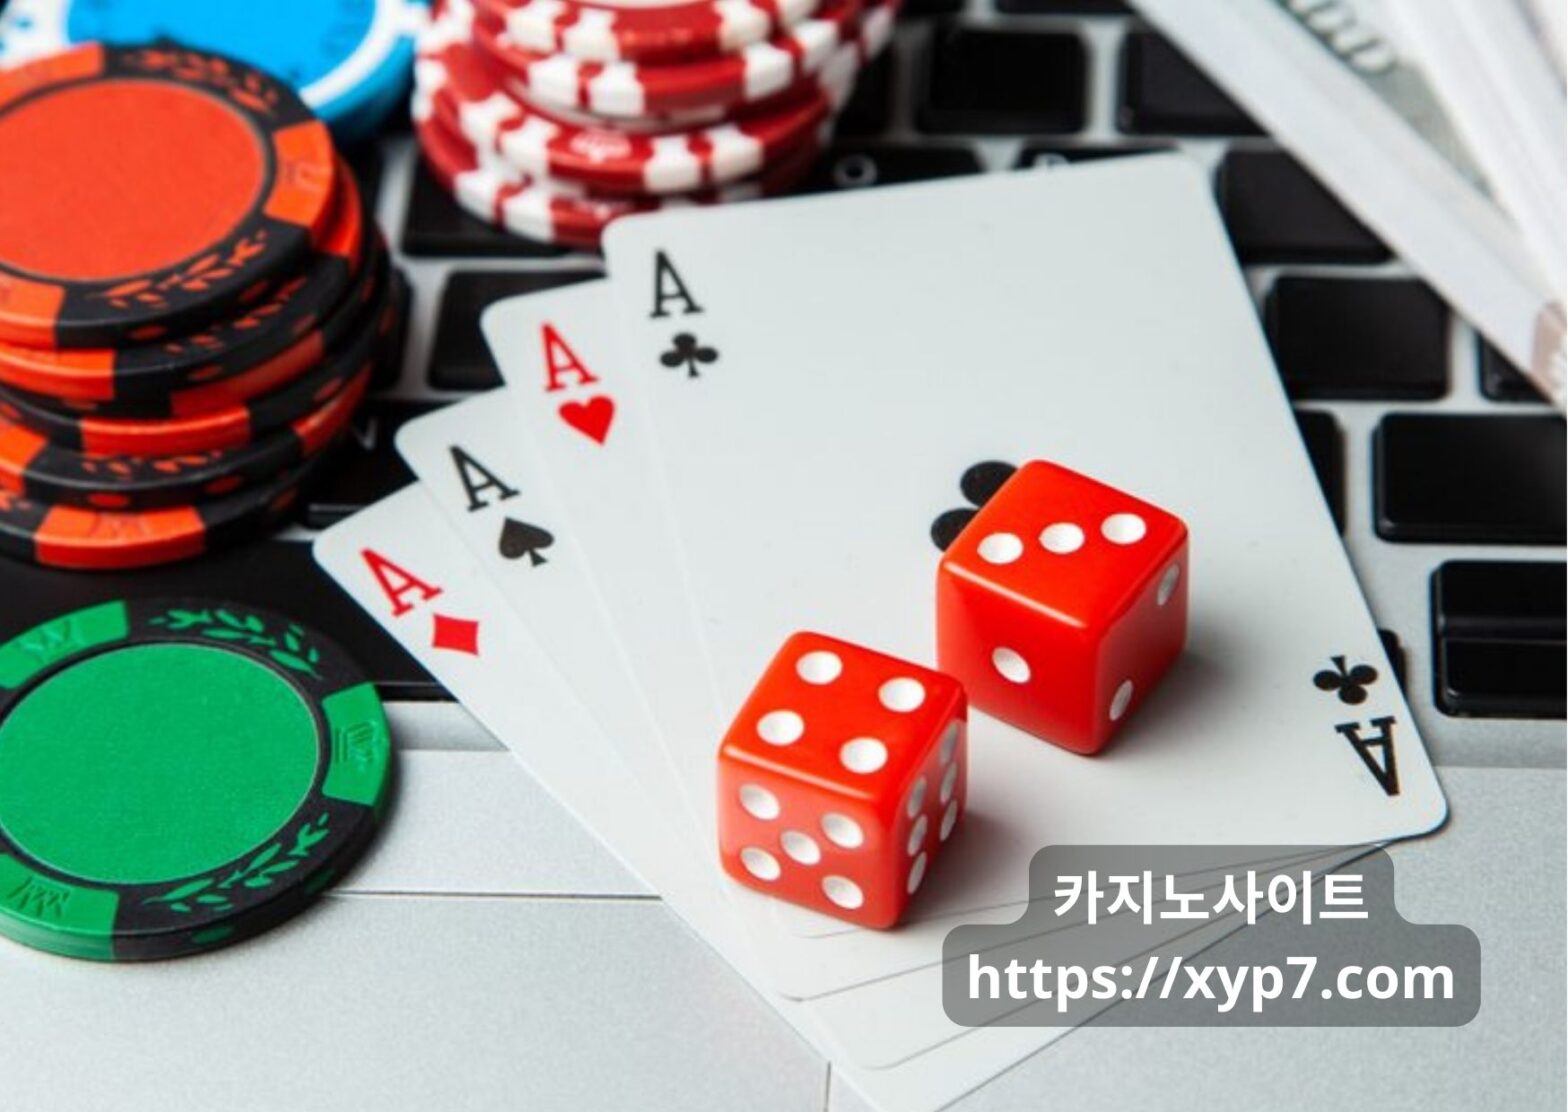 What Texas Hold 'Em Can Teach You About Influencing Customers